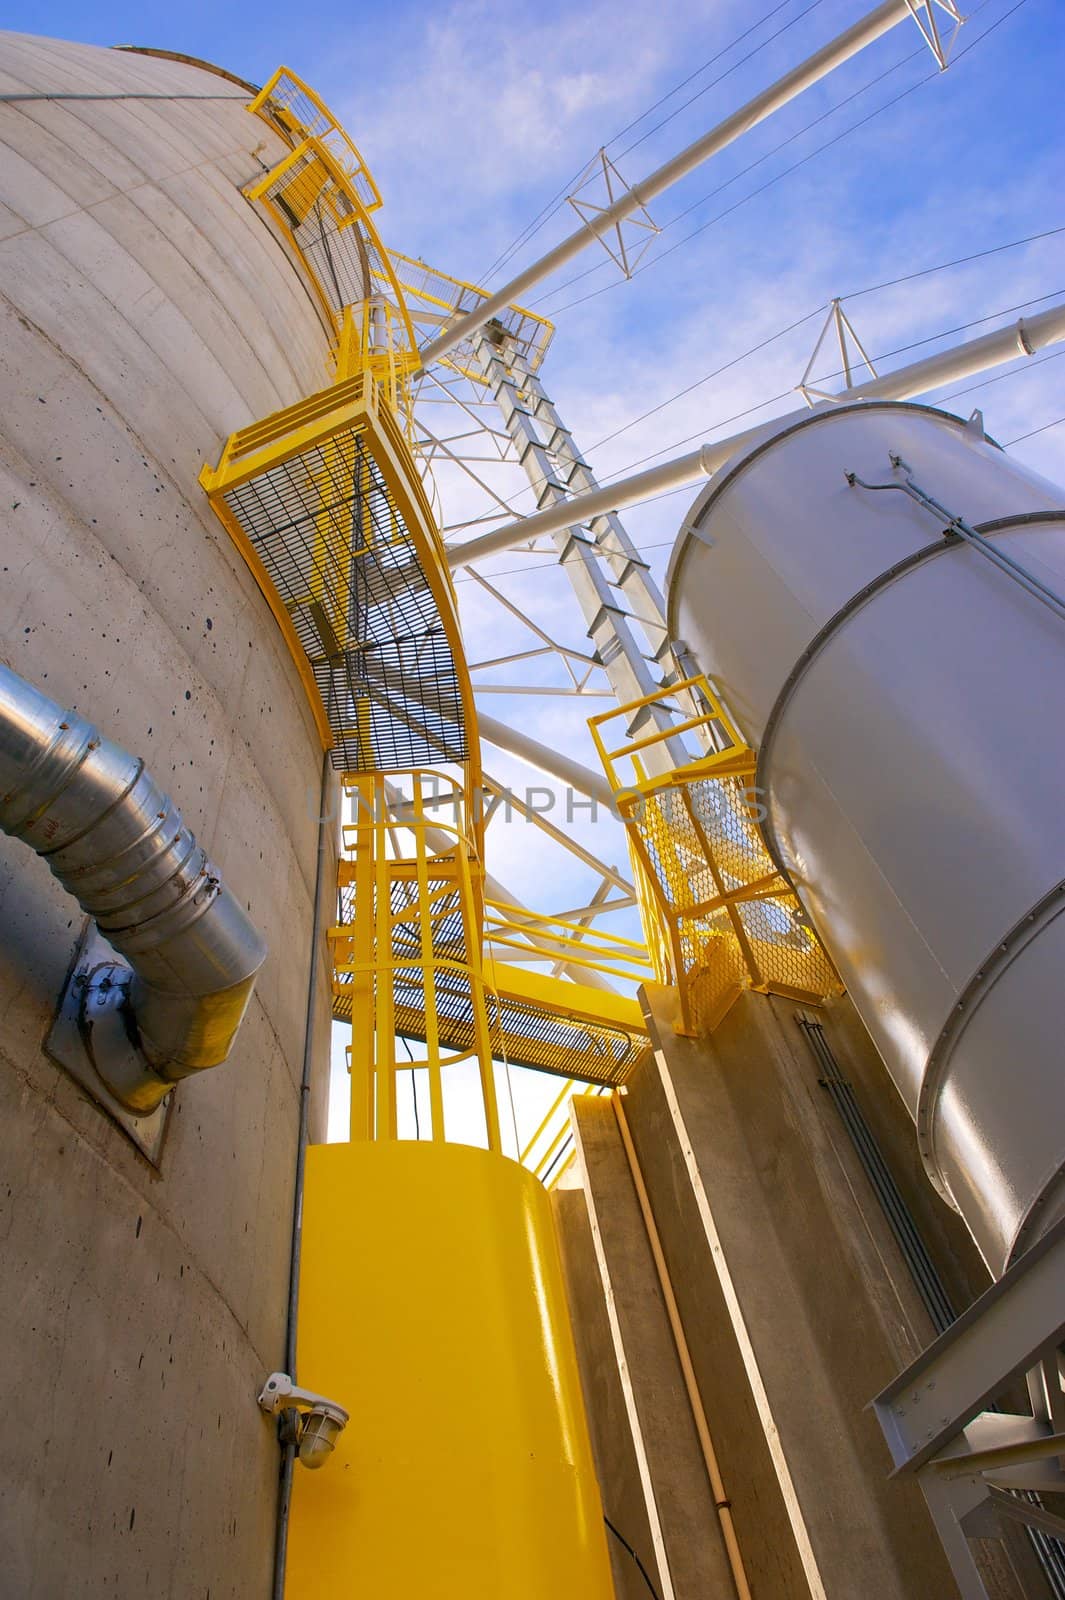 Grain Silos with Yellow Safety Areas by pixelsnap